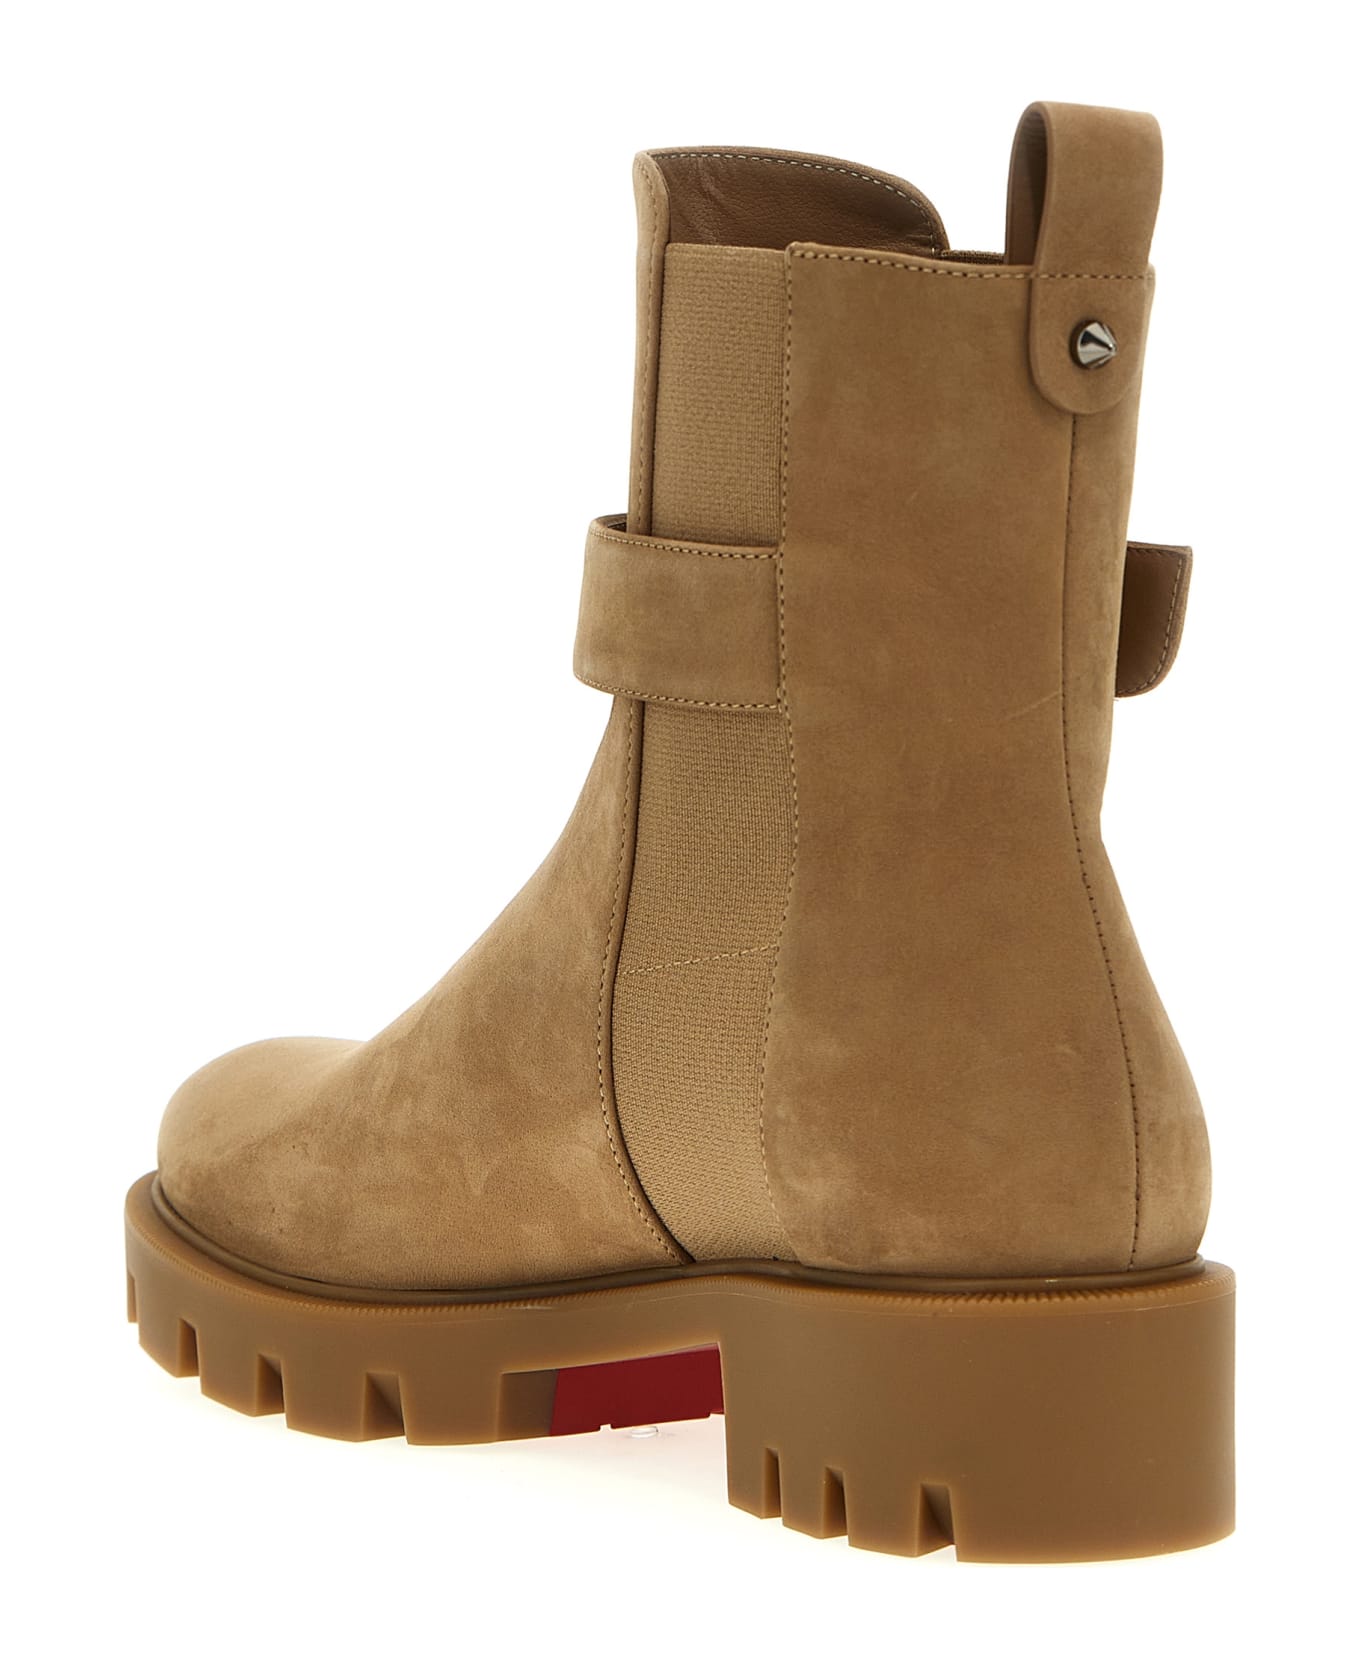 Christian Louboutin 'cl' Ankle Boots - Beige ブーツ